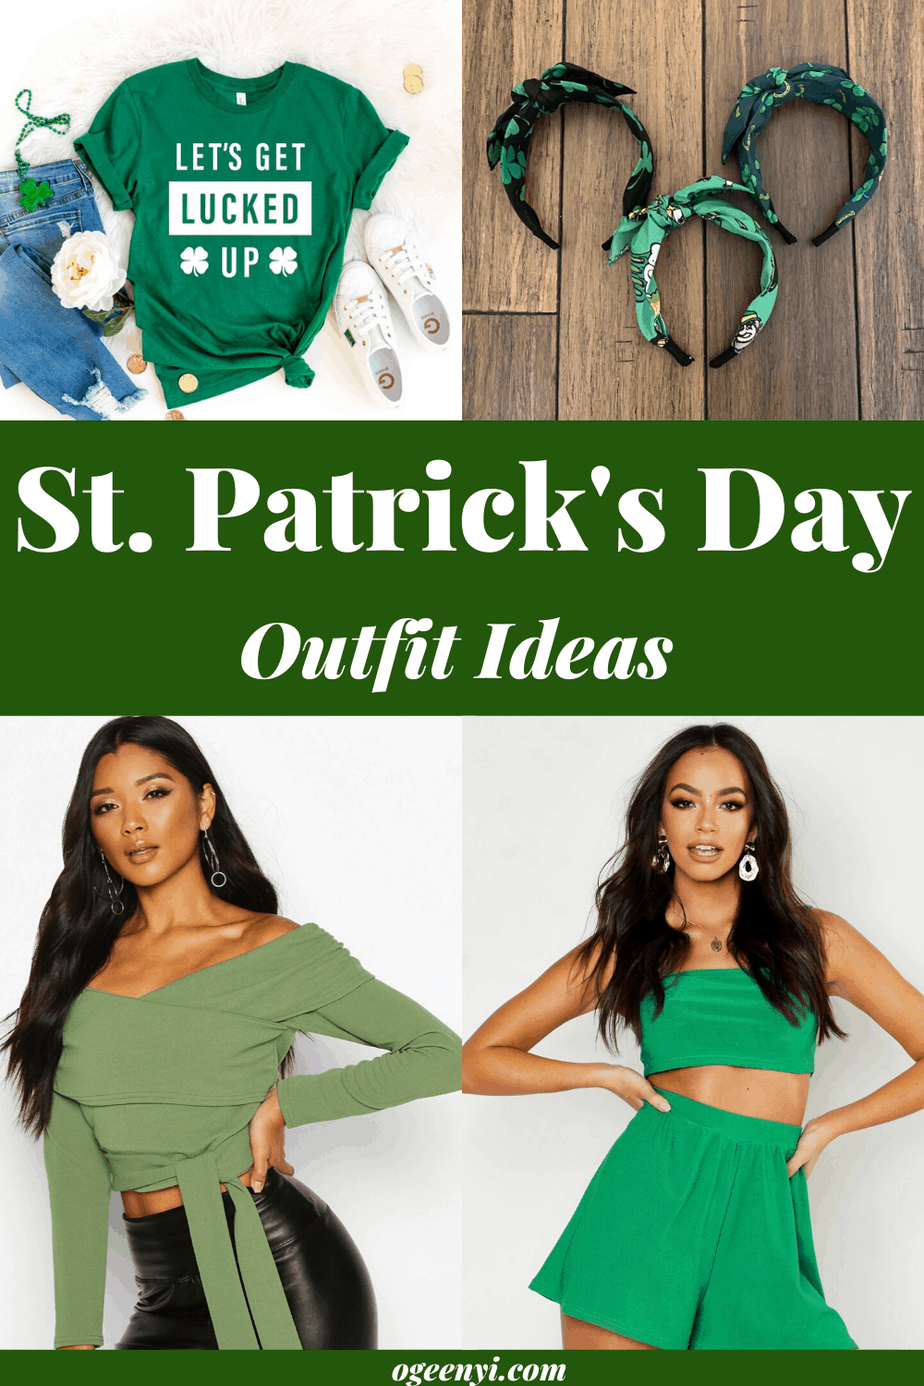 St. Patrick's Day Outfit Ideas: How To Look Fabulous In Green